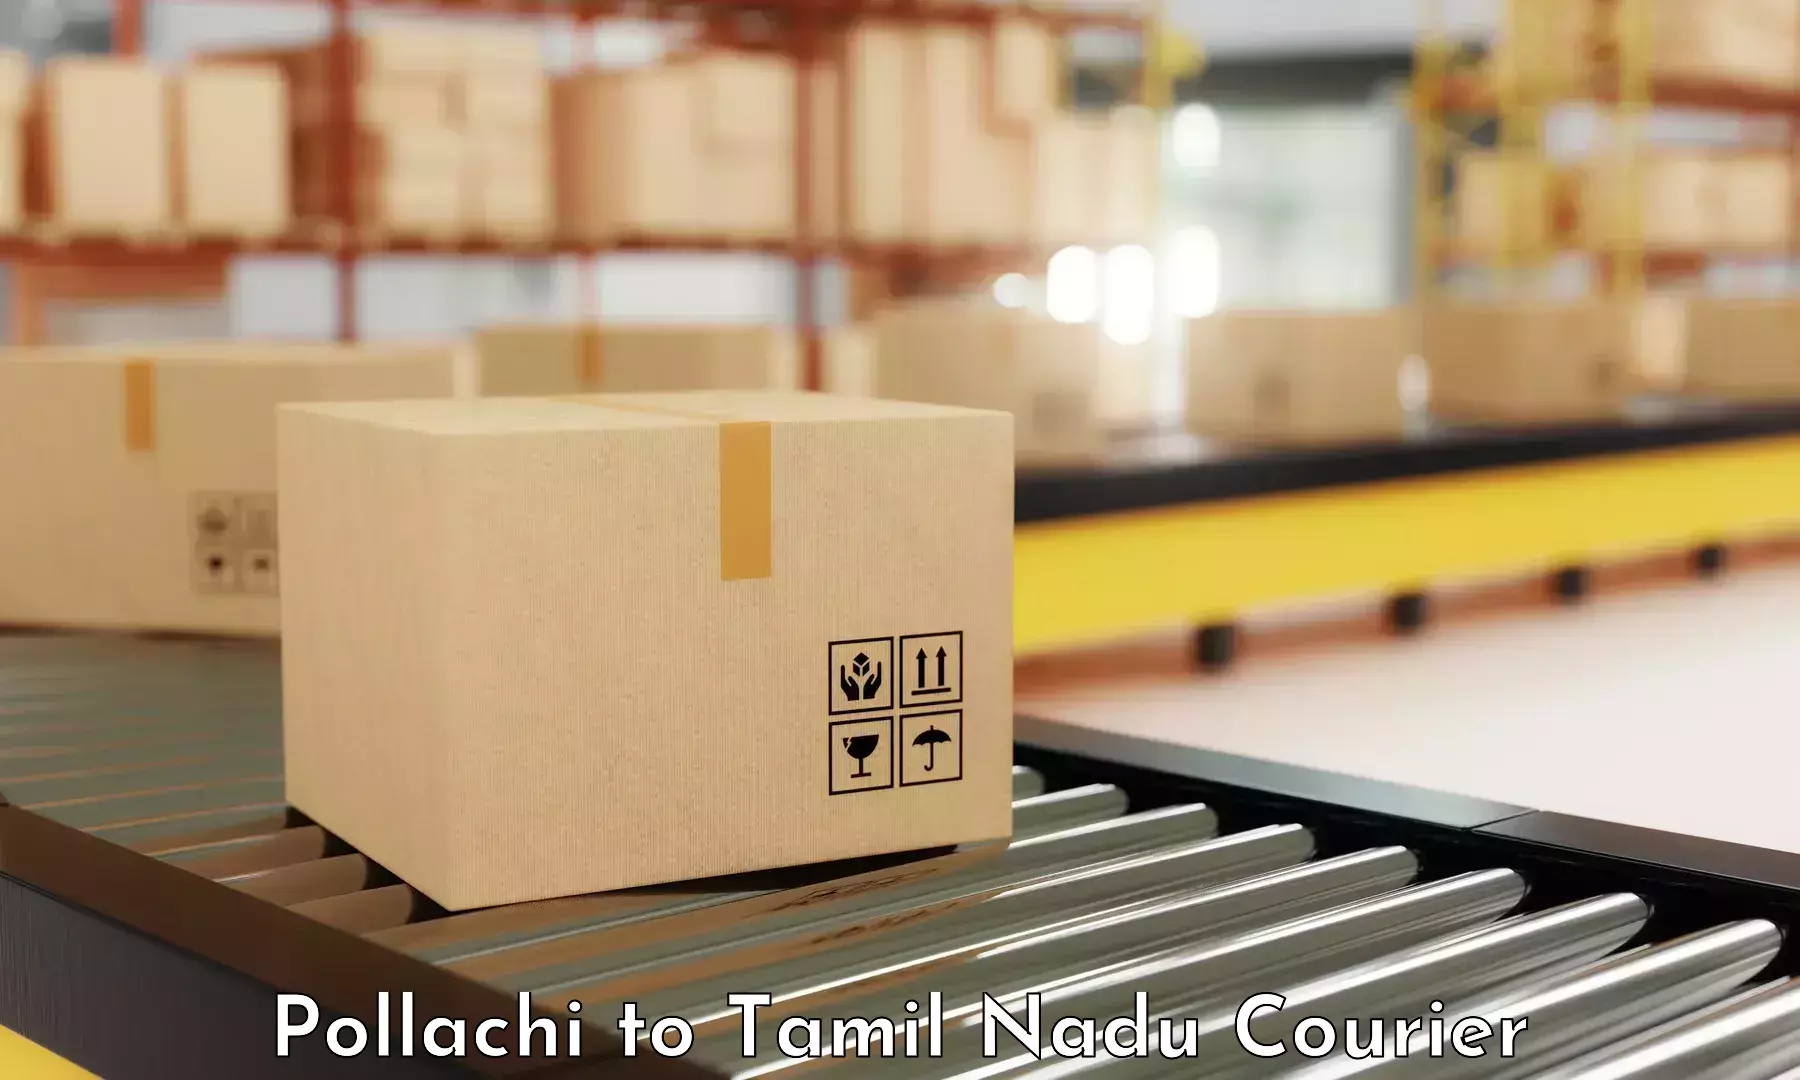 Package delivery network Pollachi to Periyakulam